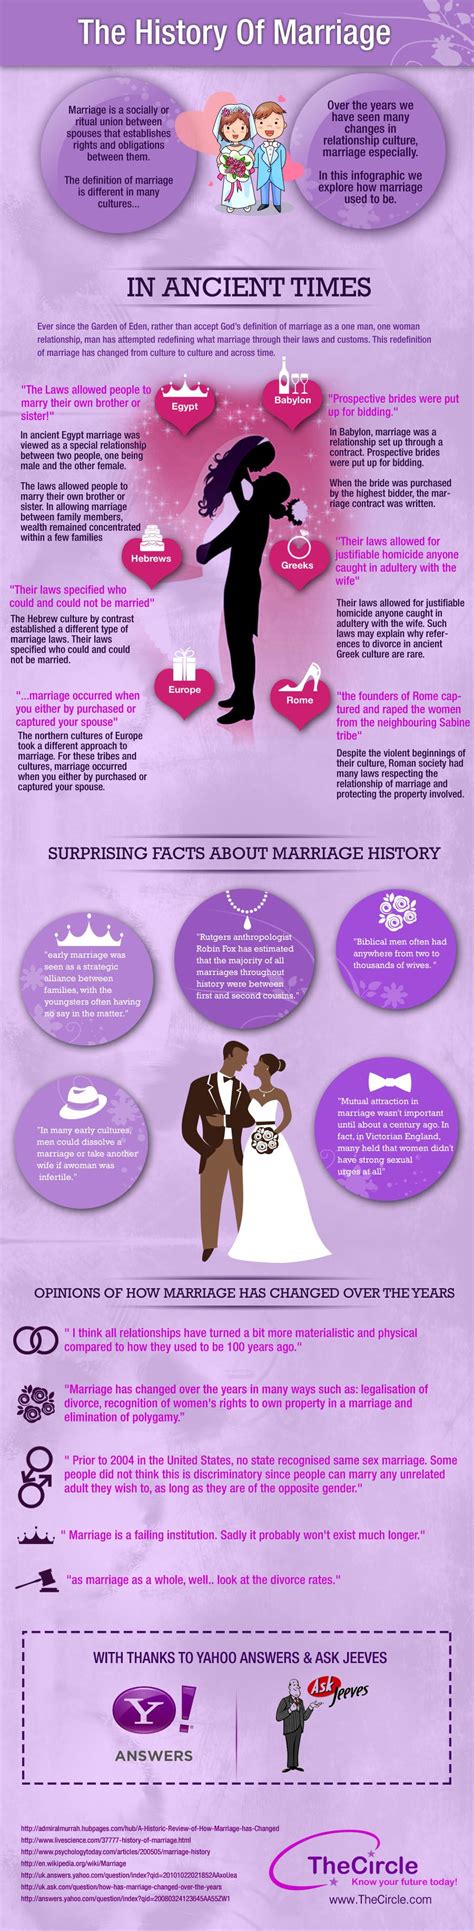 the history of marriage infographic